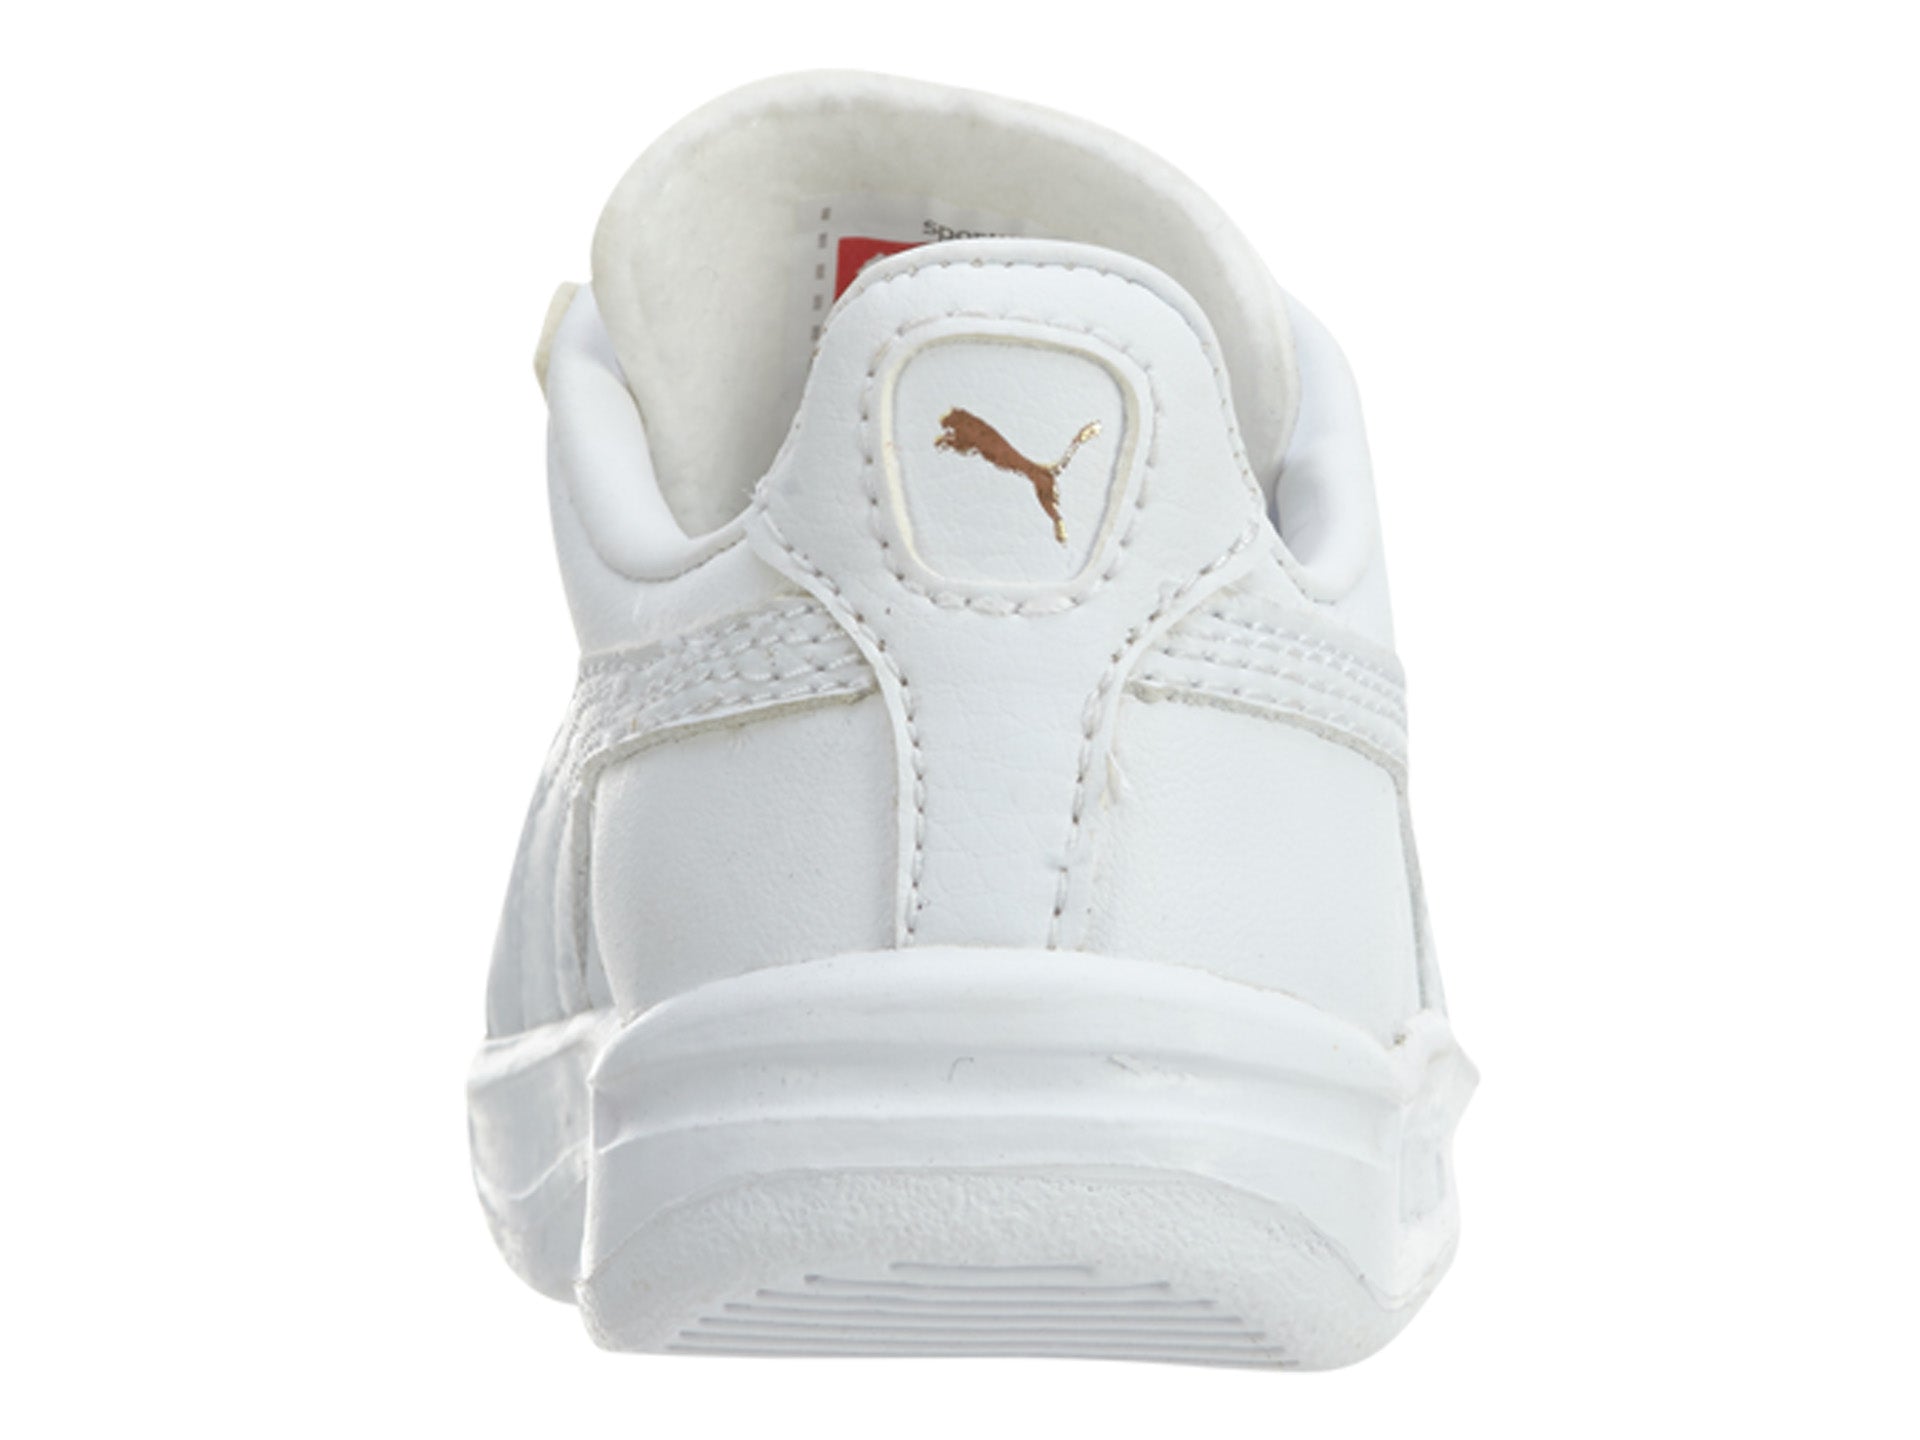 Puma Gv Special Little Kids Toddlers Style : 351721